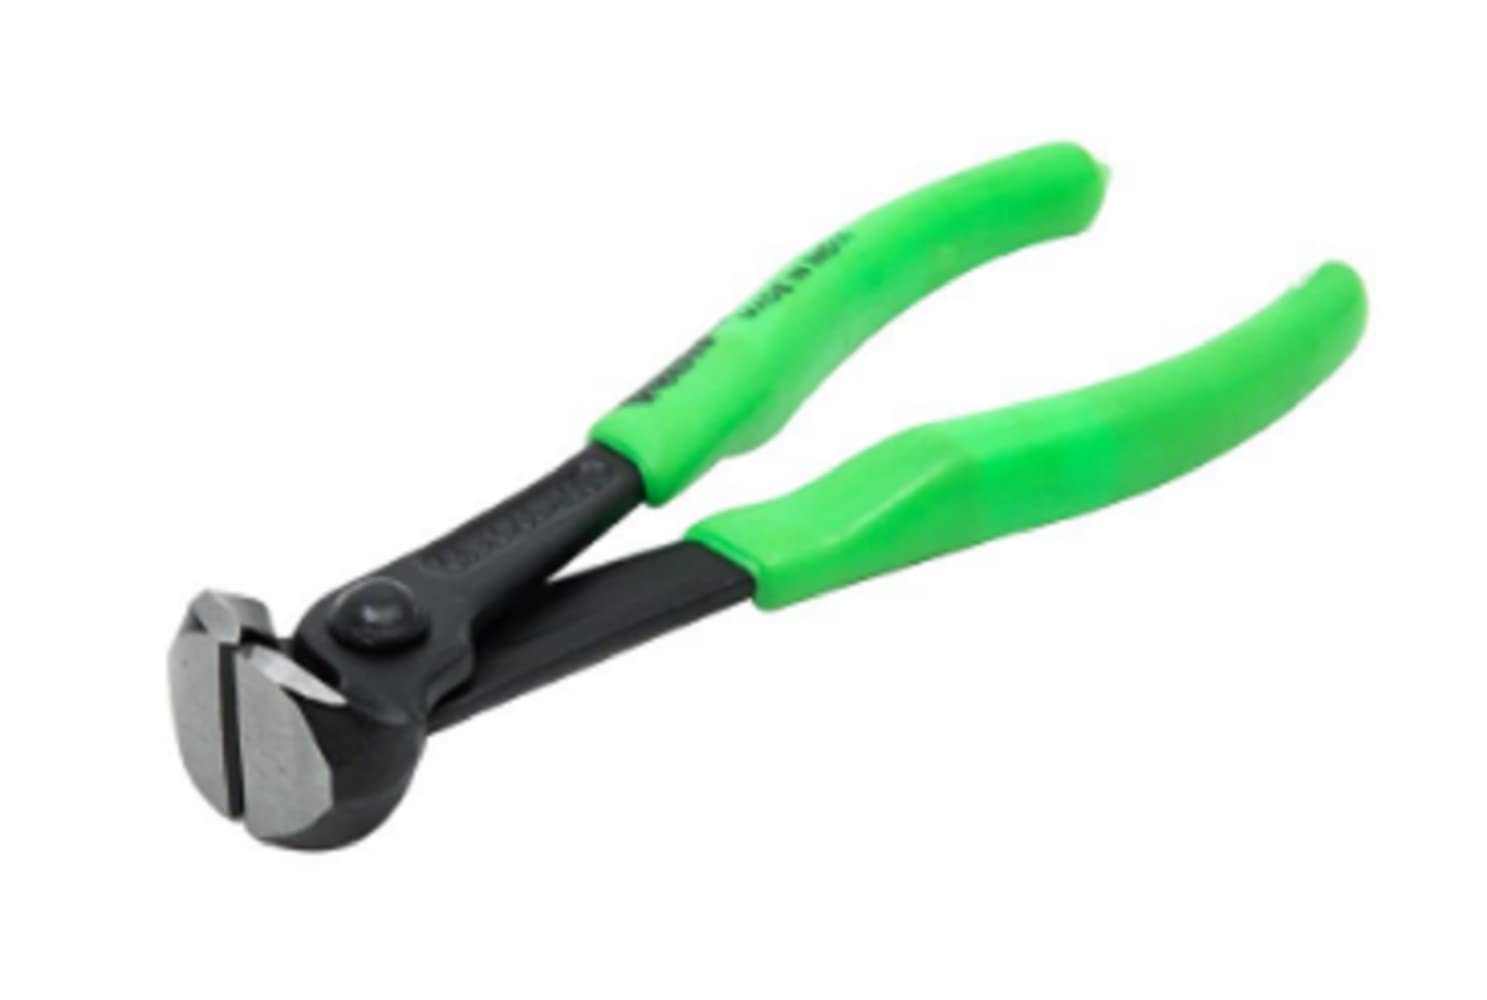 Wulf Multipurpose End Cutters Nail Pliers Puller & Remover Tool Cut & Bend the Wire of Anti-Slip PVC Handle